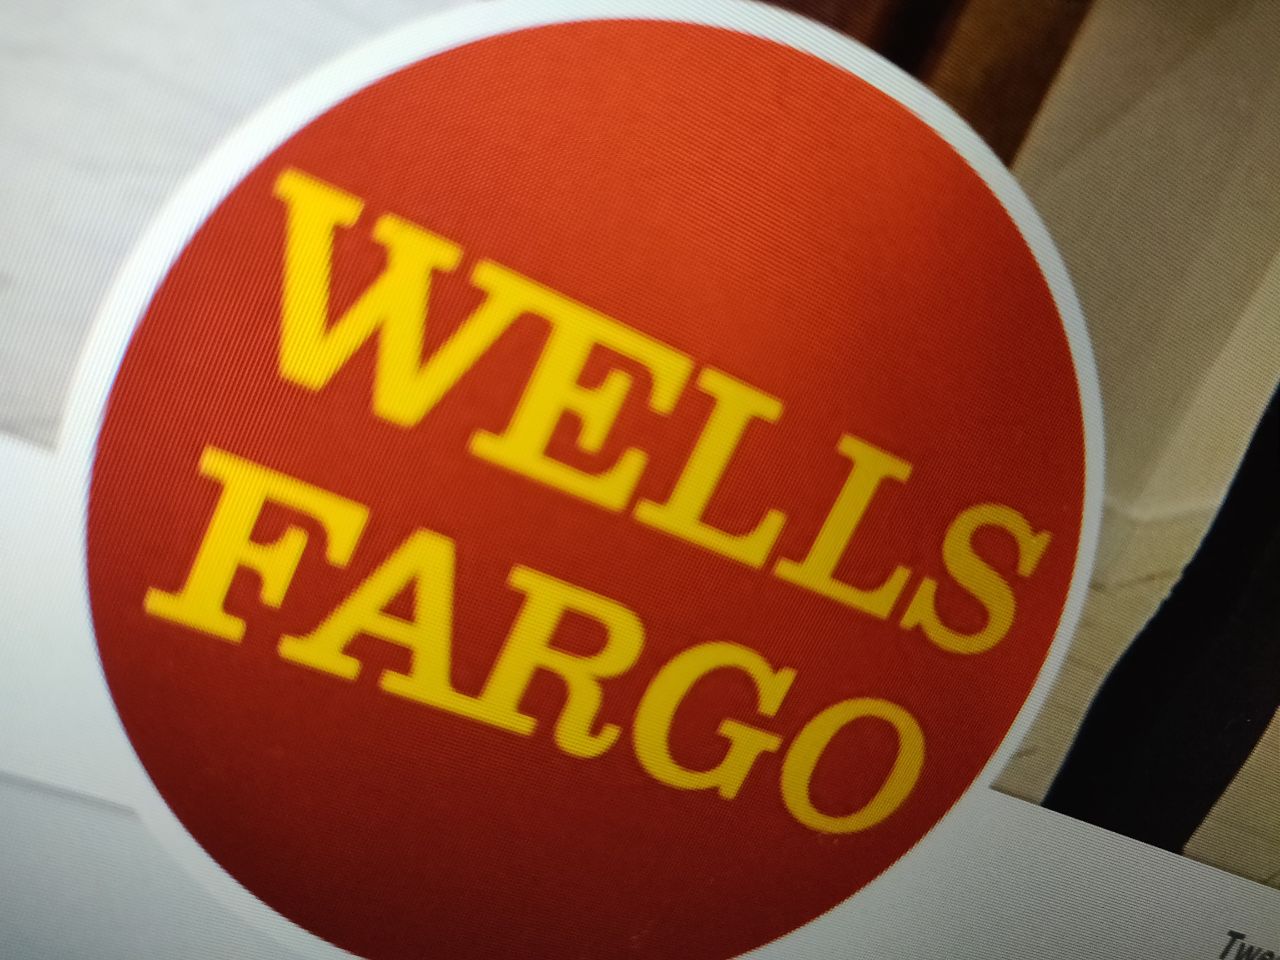 [Update: July 8] Wells Fargo website app down and not working, online / mobile banking suffers - what happened?